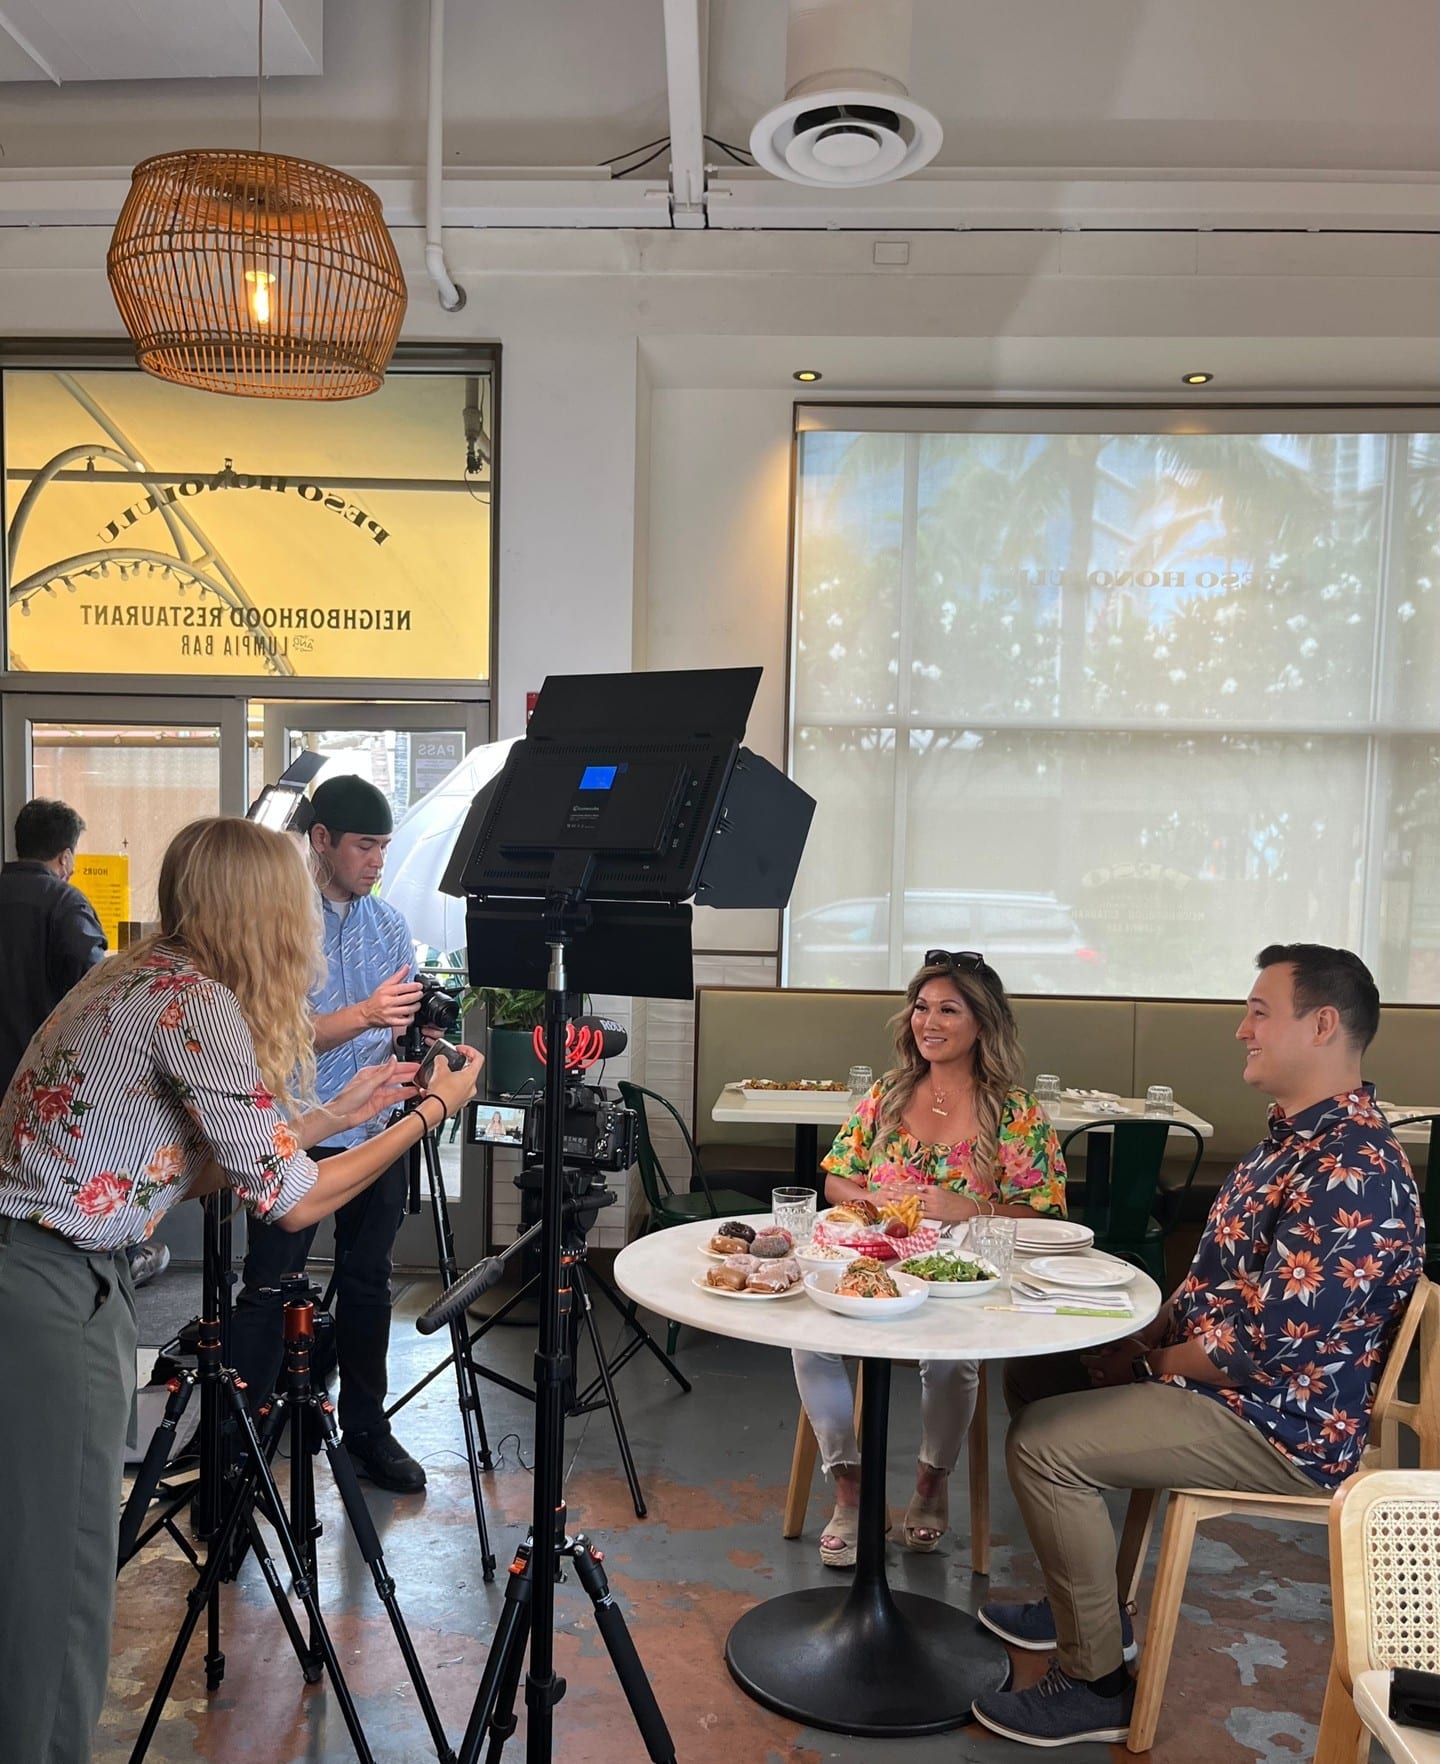 Take a tasty journey through Ward Village with the diverse mix of cafés, restaurants, bakeries, and more. Watch our General Manager, Taylor Herring, spotlight a few of these neighborhood eateries in a recent episode of @wherehawaiieats, available at the link in our bio.